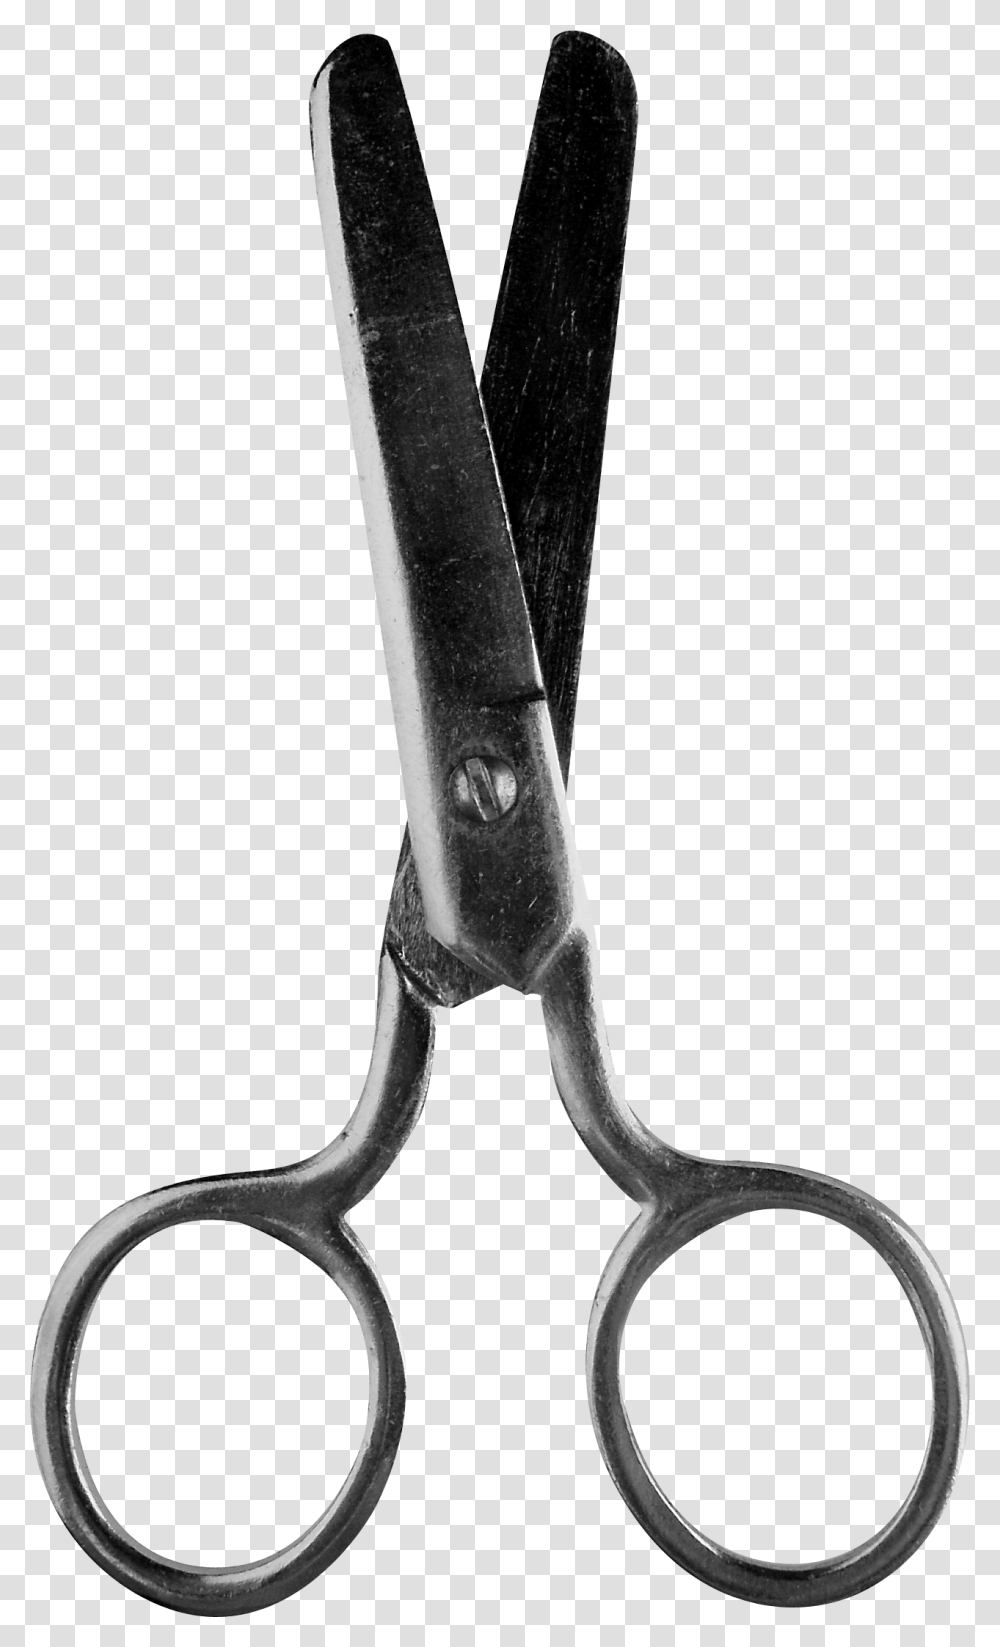 Free Download Of Scissors File Scissors, Blade, Weapon, Weaponry, Shears Transparent Png